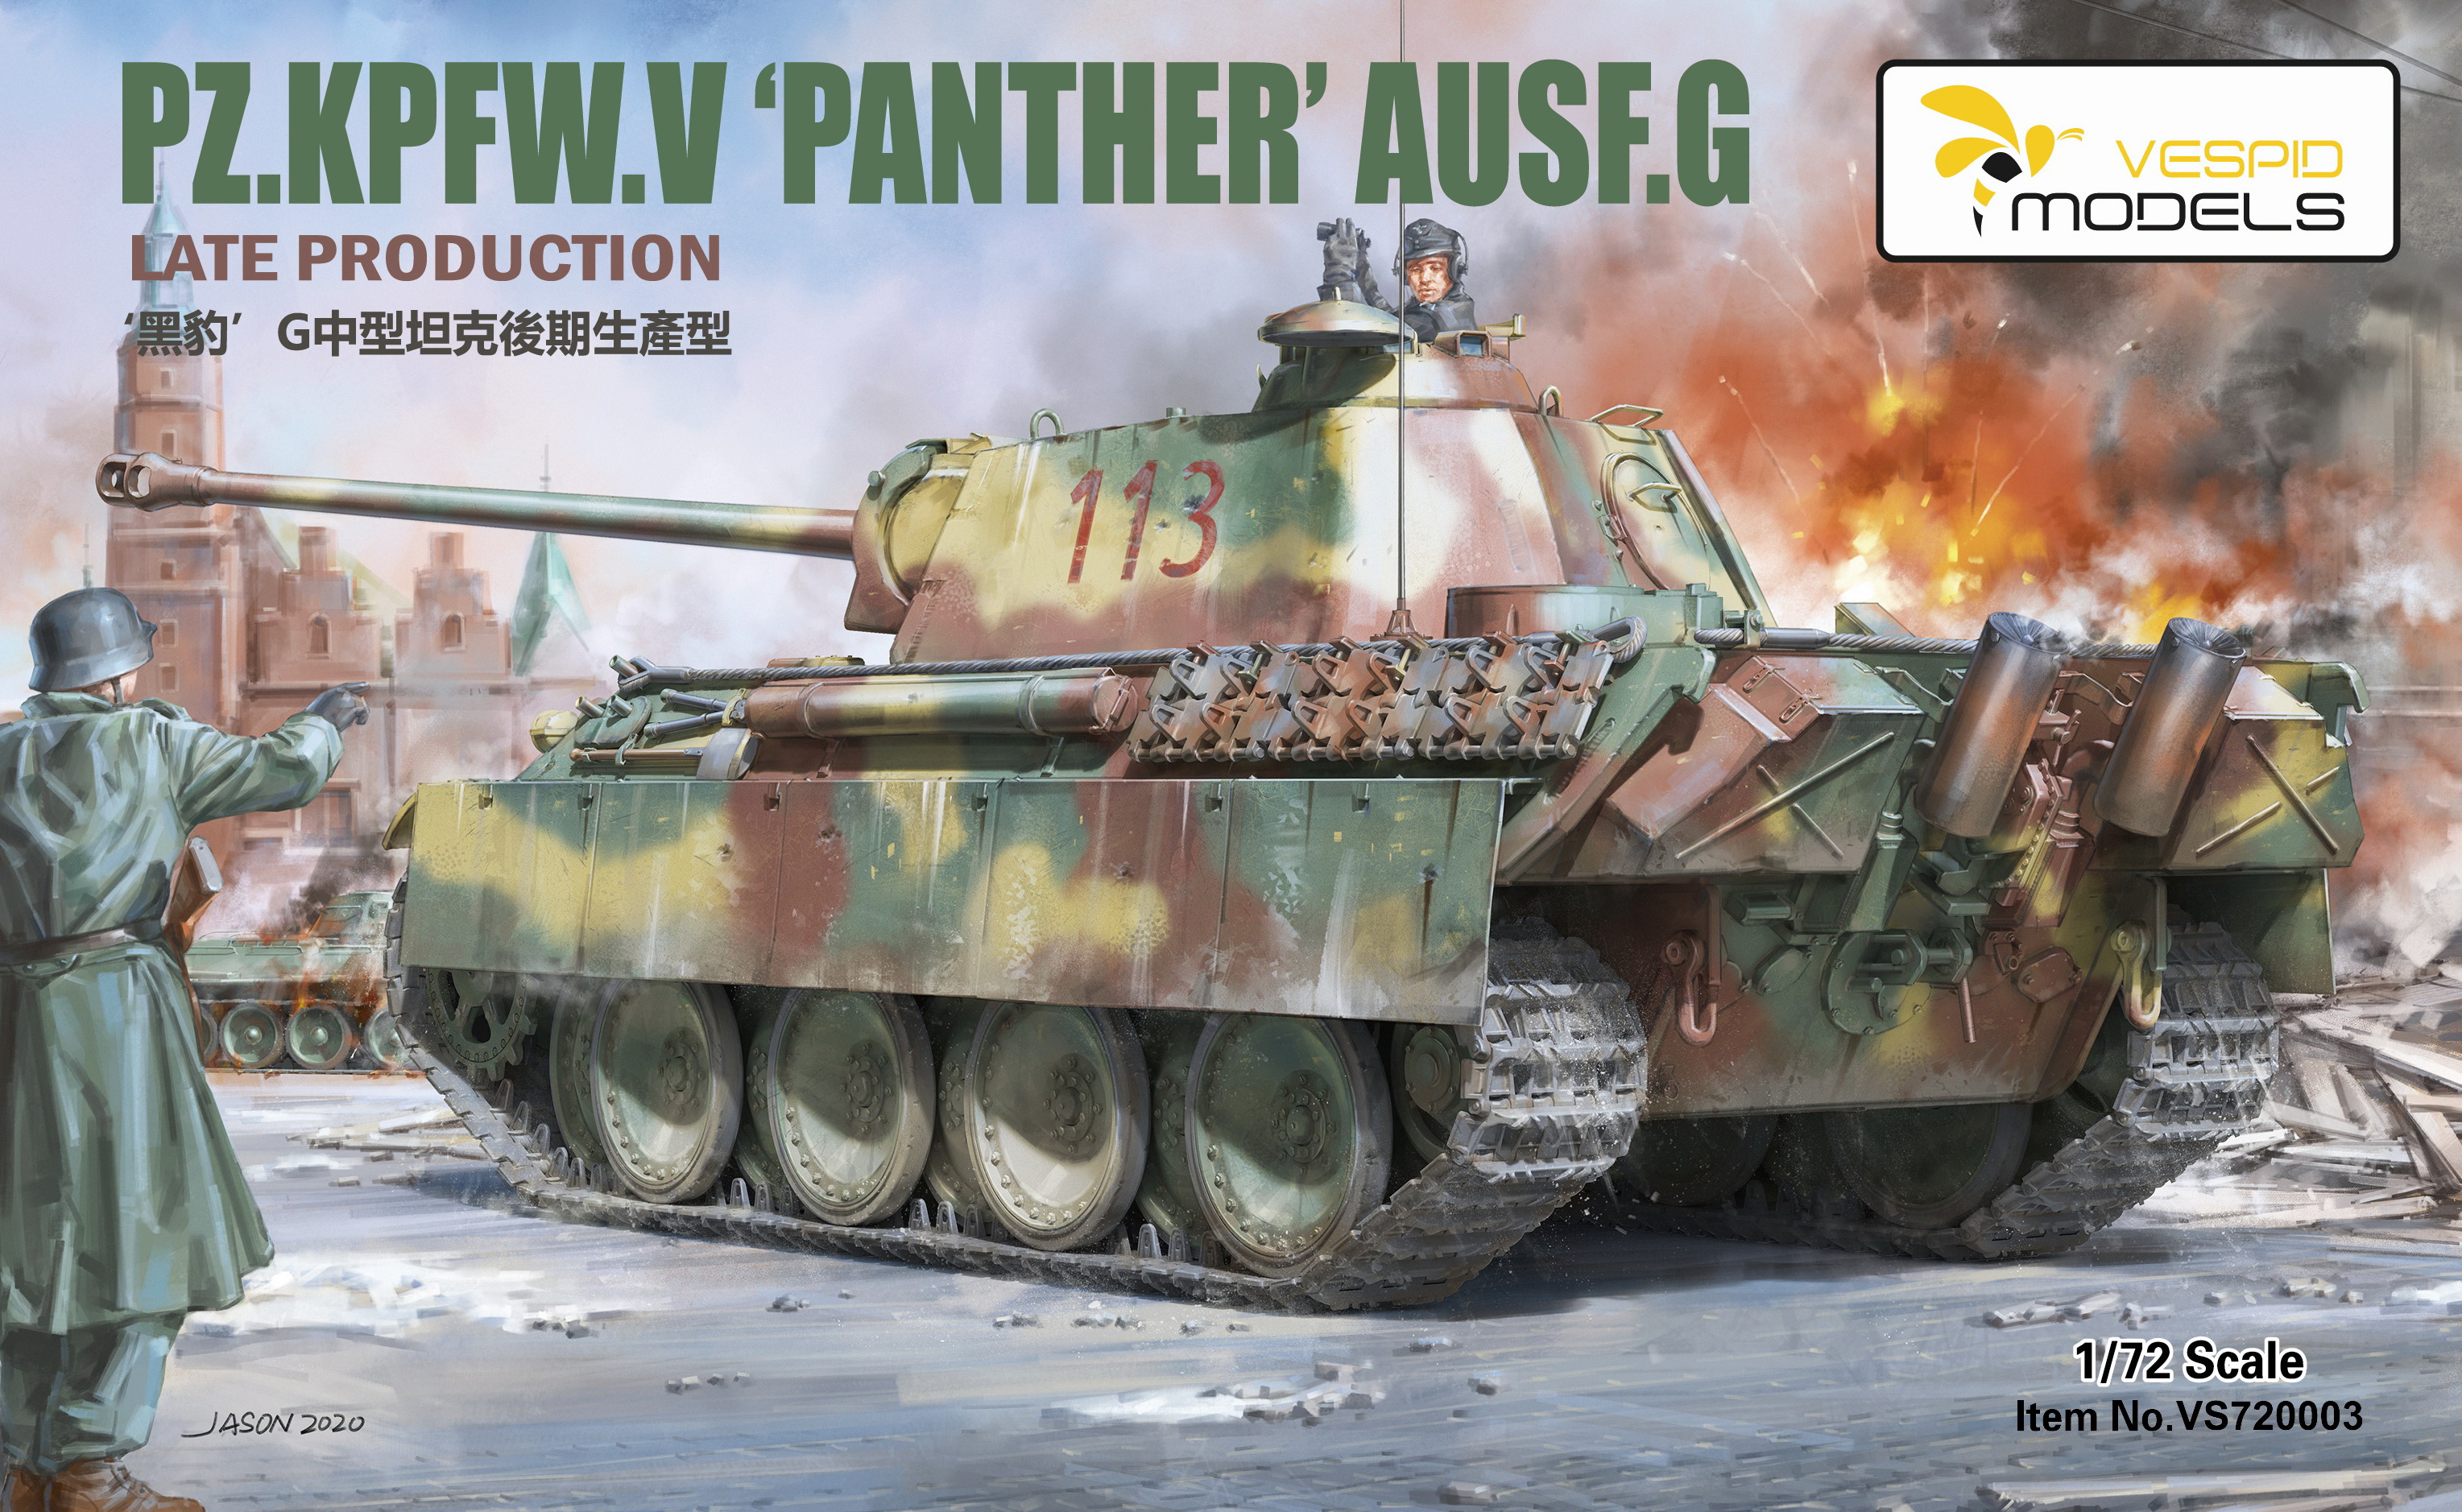 Pz.Kpfw.V Panther Ausf.G late